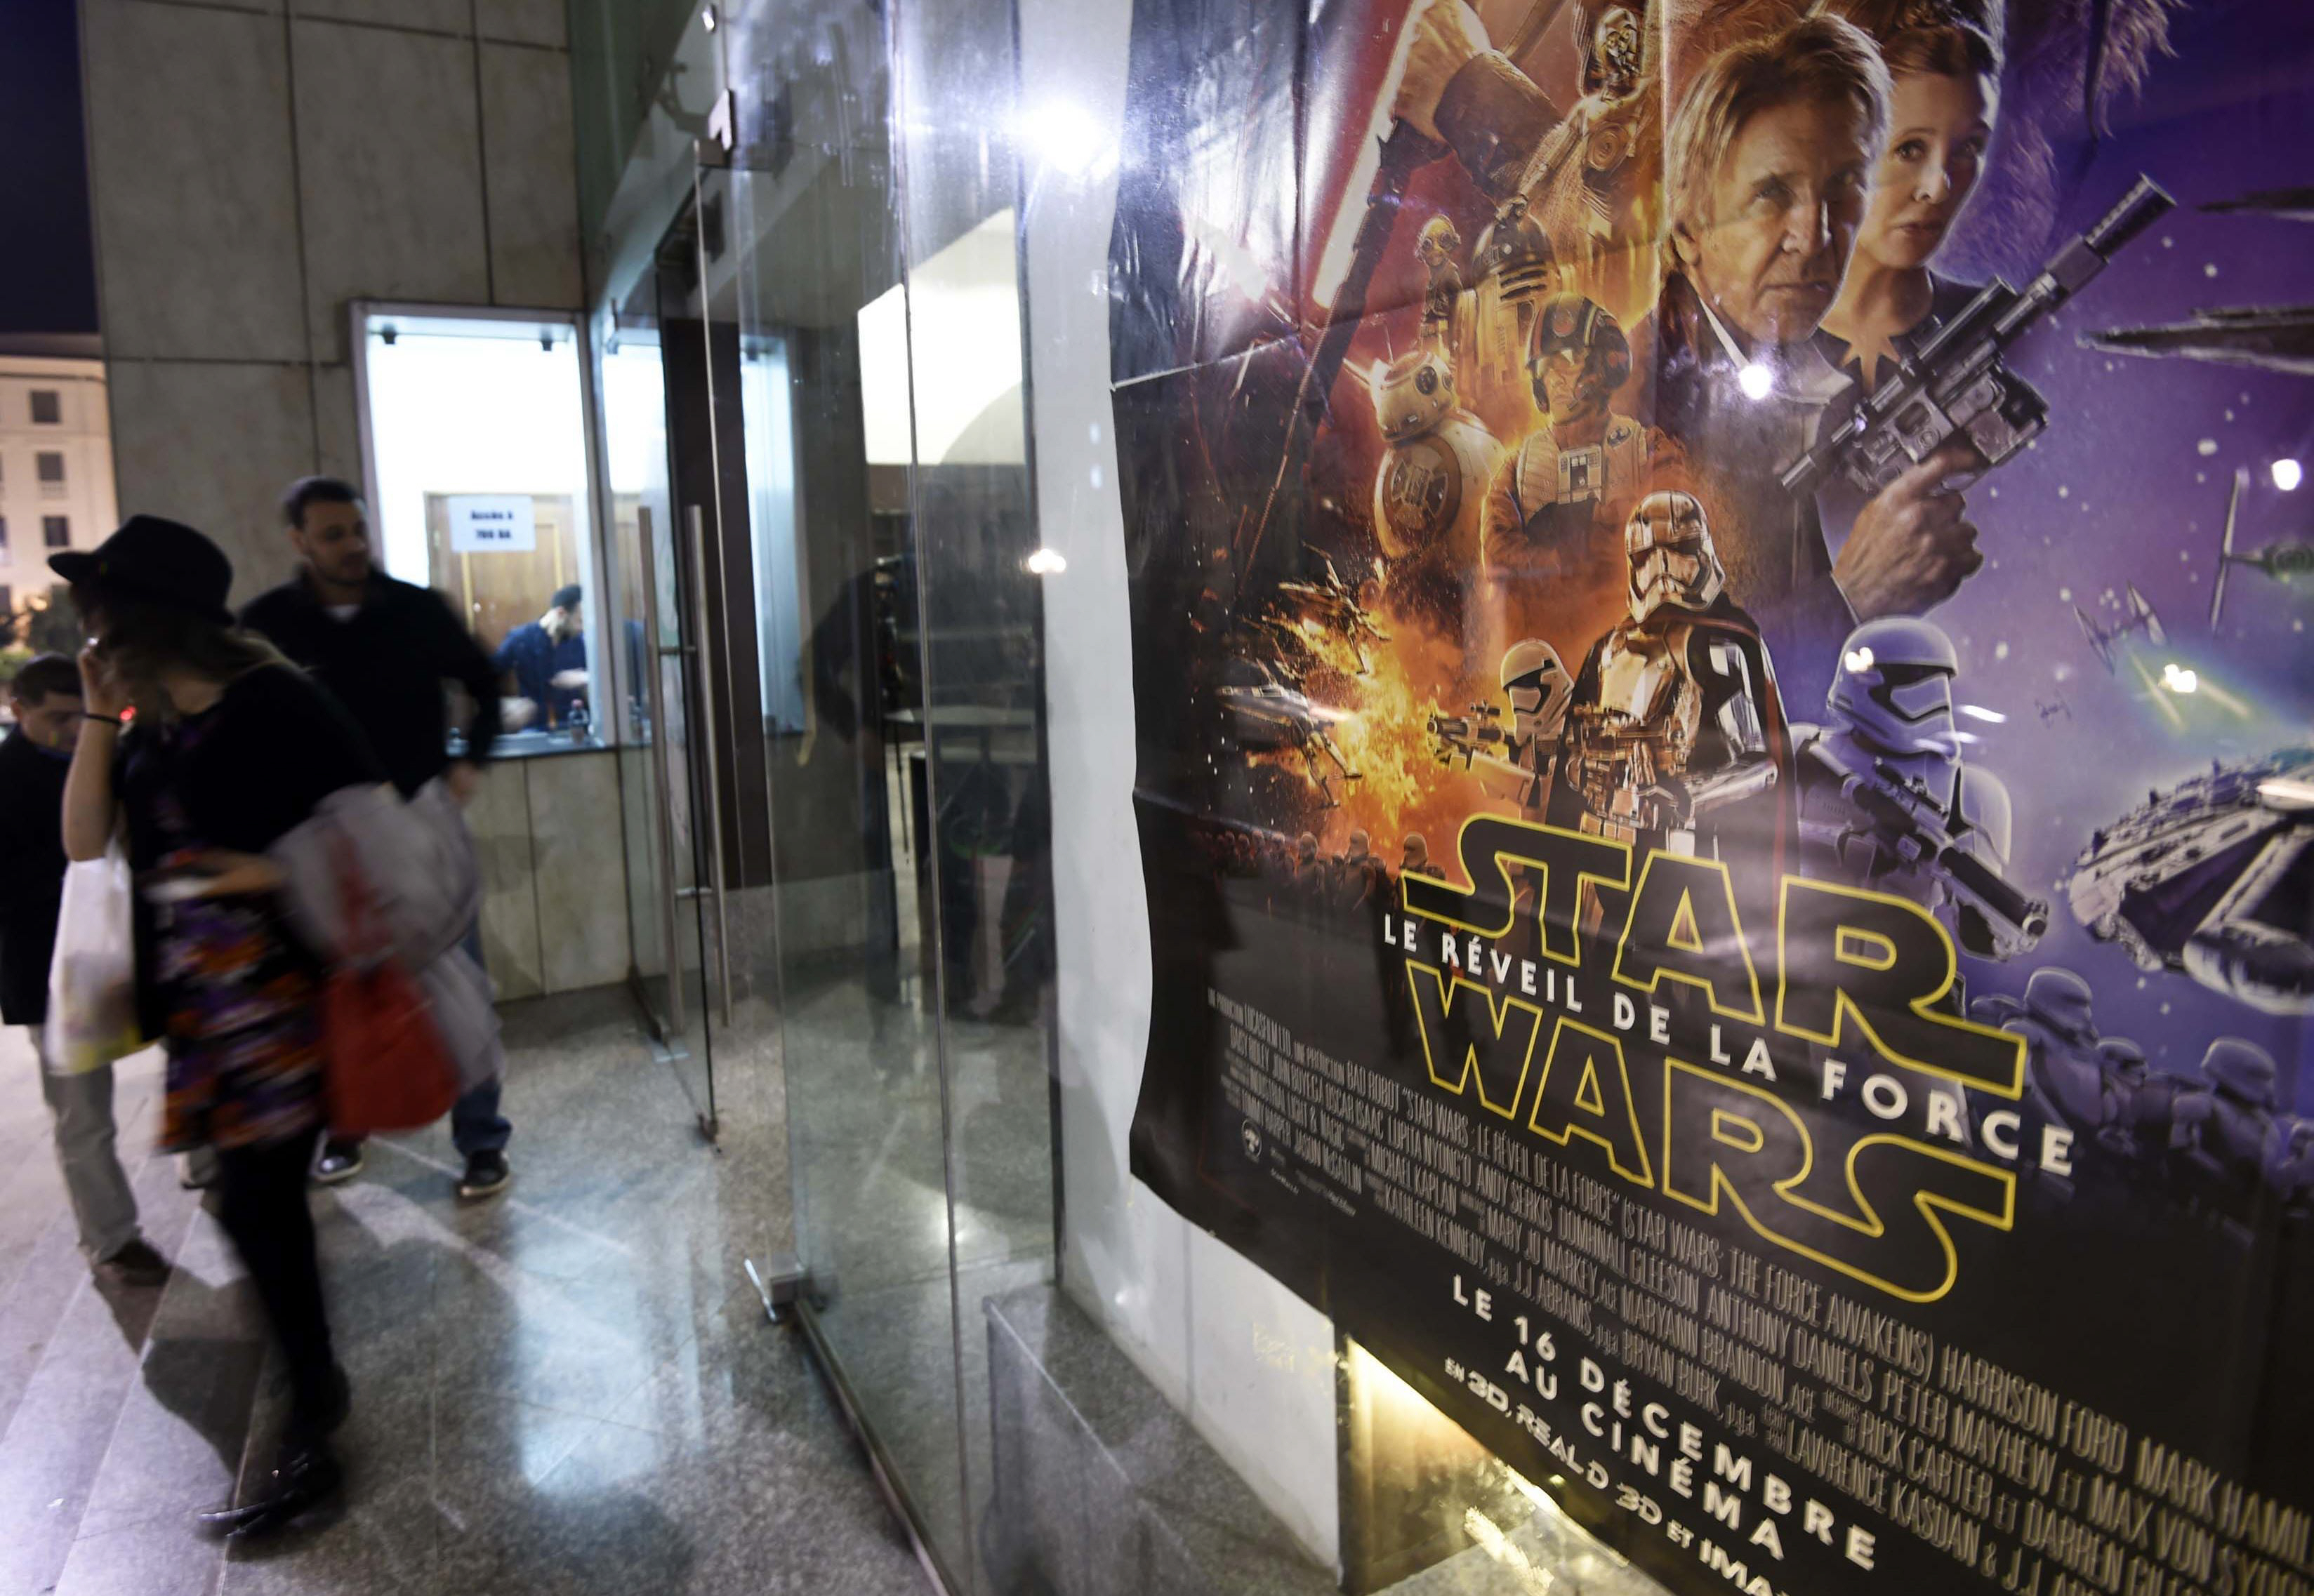 quot star wars quot fans wait outside the cinema prior to the premier screening of the latest quot star wars the force awakens quot film in the algerian capital algiers on december 20 2015 globally the latest quot star wars quot space epic raked in an estimated 517 million disney said breaking records for biggest opening weekend abroad in 18 other countries including russia and germany and second biggest across four nations photo afp